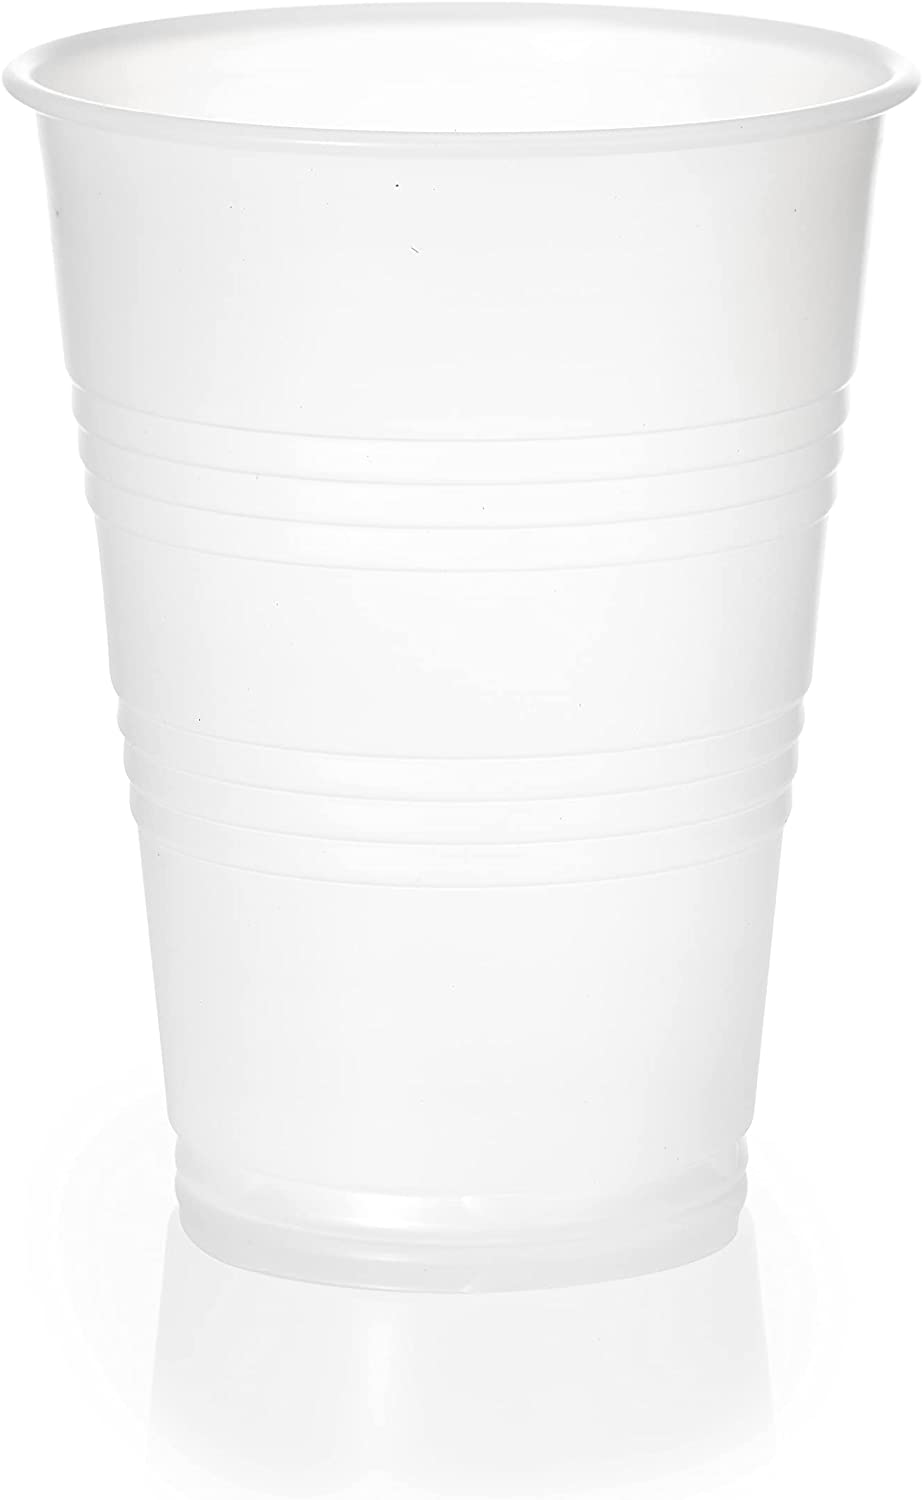 Translucent Plastic Cups  Translucent Cups  Soda Cups  Plastic Drinking Cup  Party Cups  Juice Soft Drink Cups  disposable plastic cups  Disposable Cups  cups  Cold Drink Cups  Clear Plastic Cups  Clear PET Drinking Cups  Clear Drinking Cups  Clear Cups  BPA Free  BBQ Cups  3oz  3 ounces